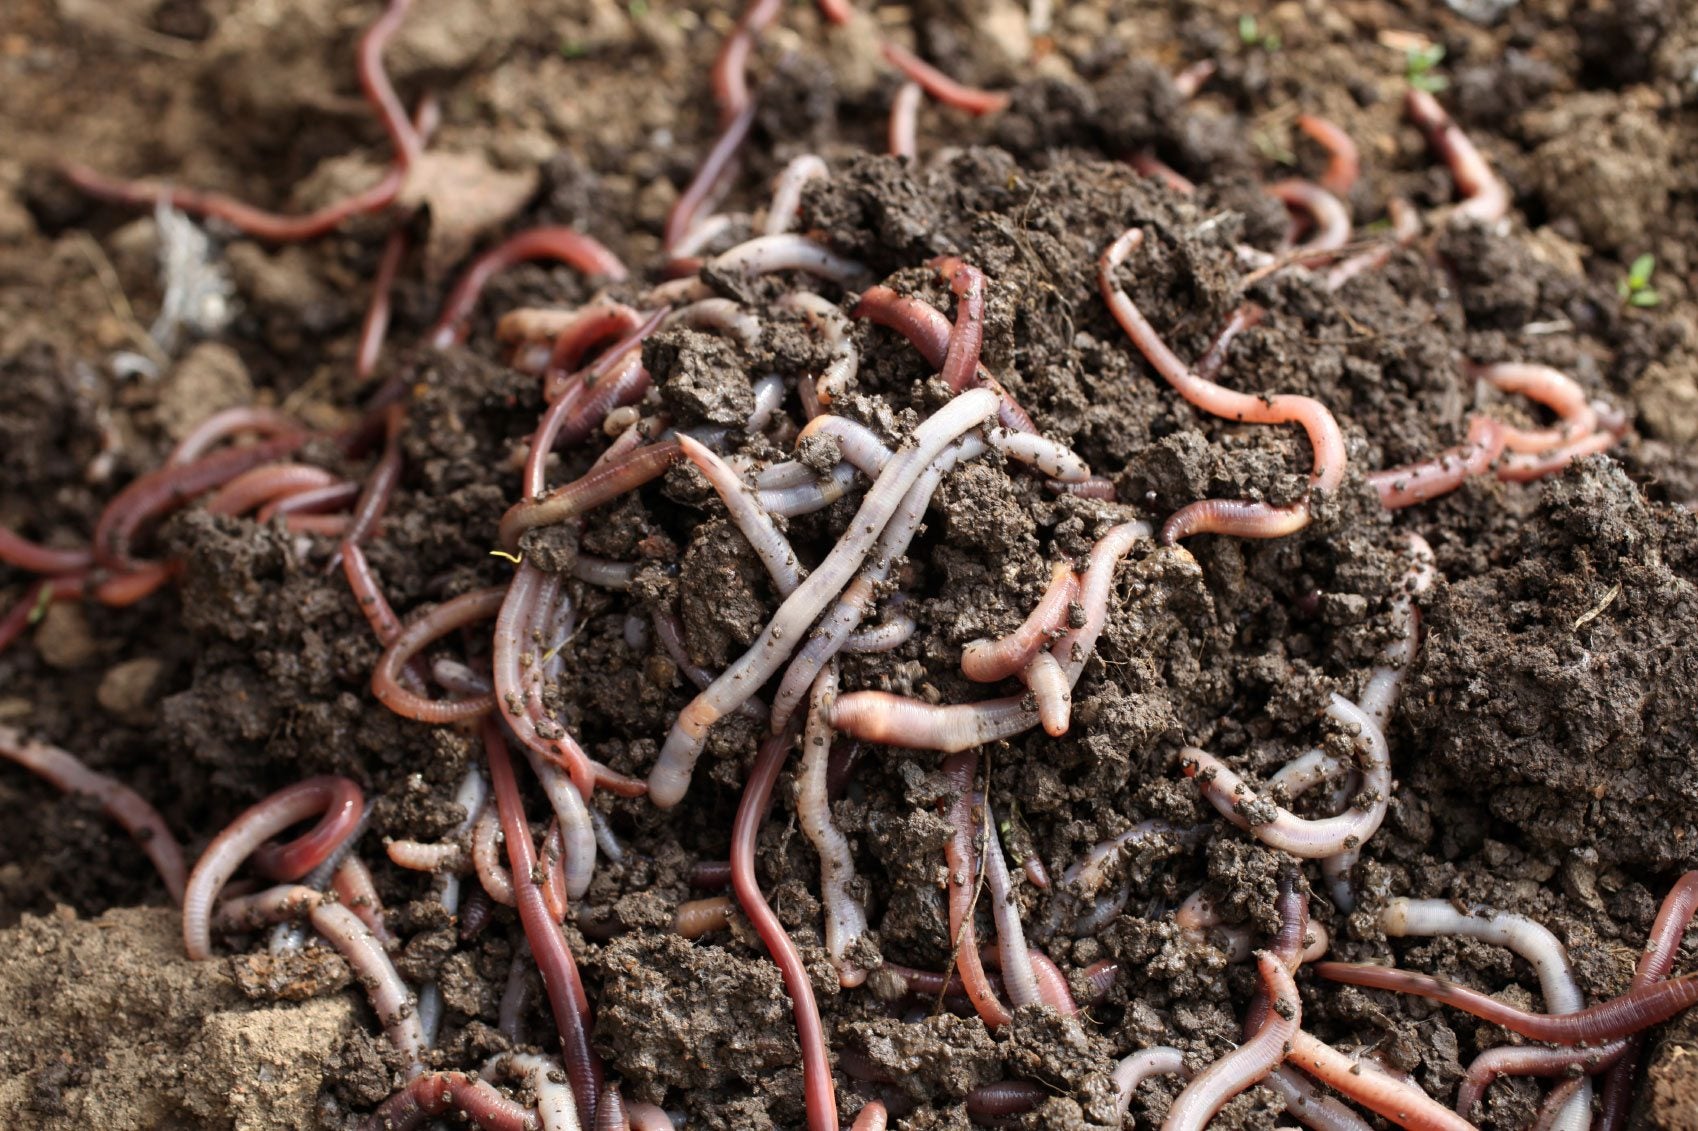 Vermicomposting Worm Types - What Are The Best Worms For Compost Bin